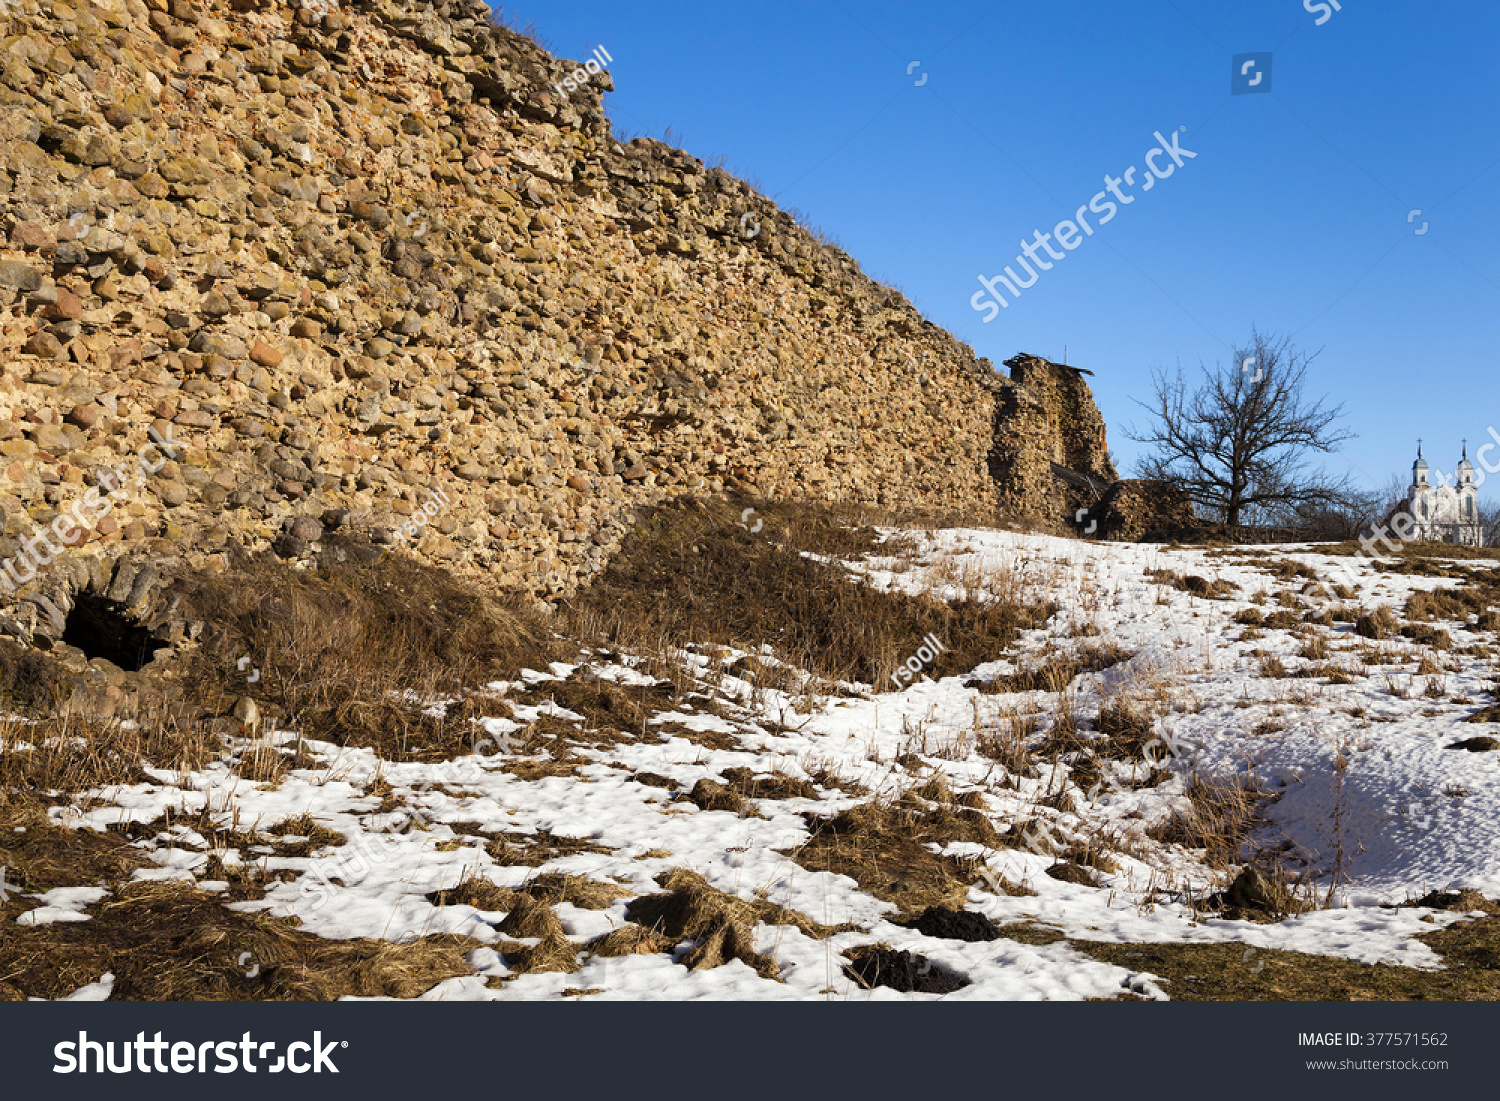   the ruins of the ancient ramparts of the castle, located in the village of Krevo. Belarus. Winter #377571562